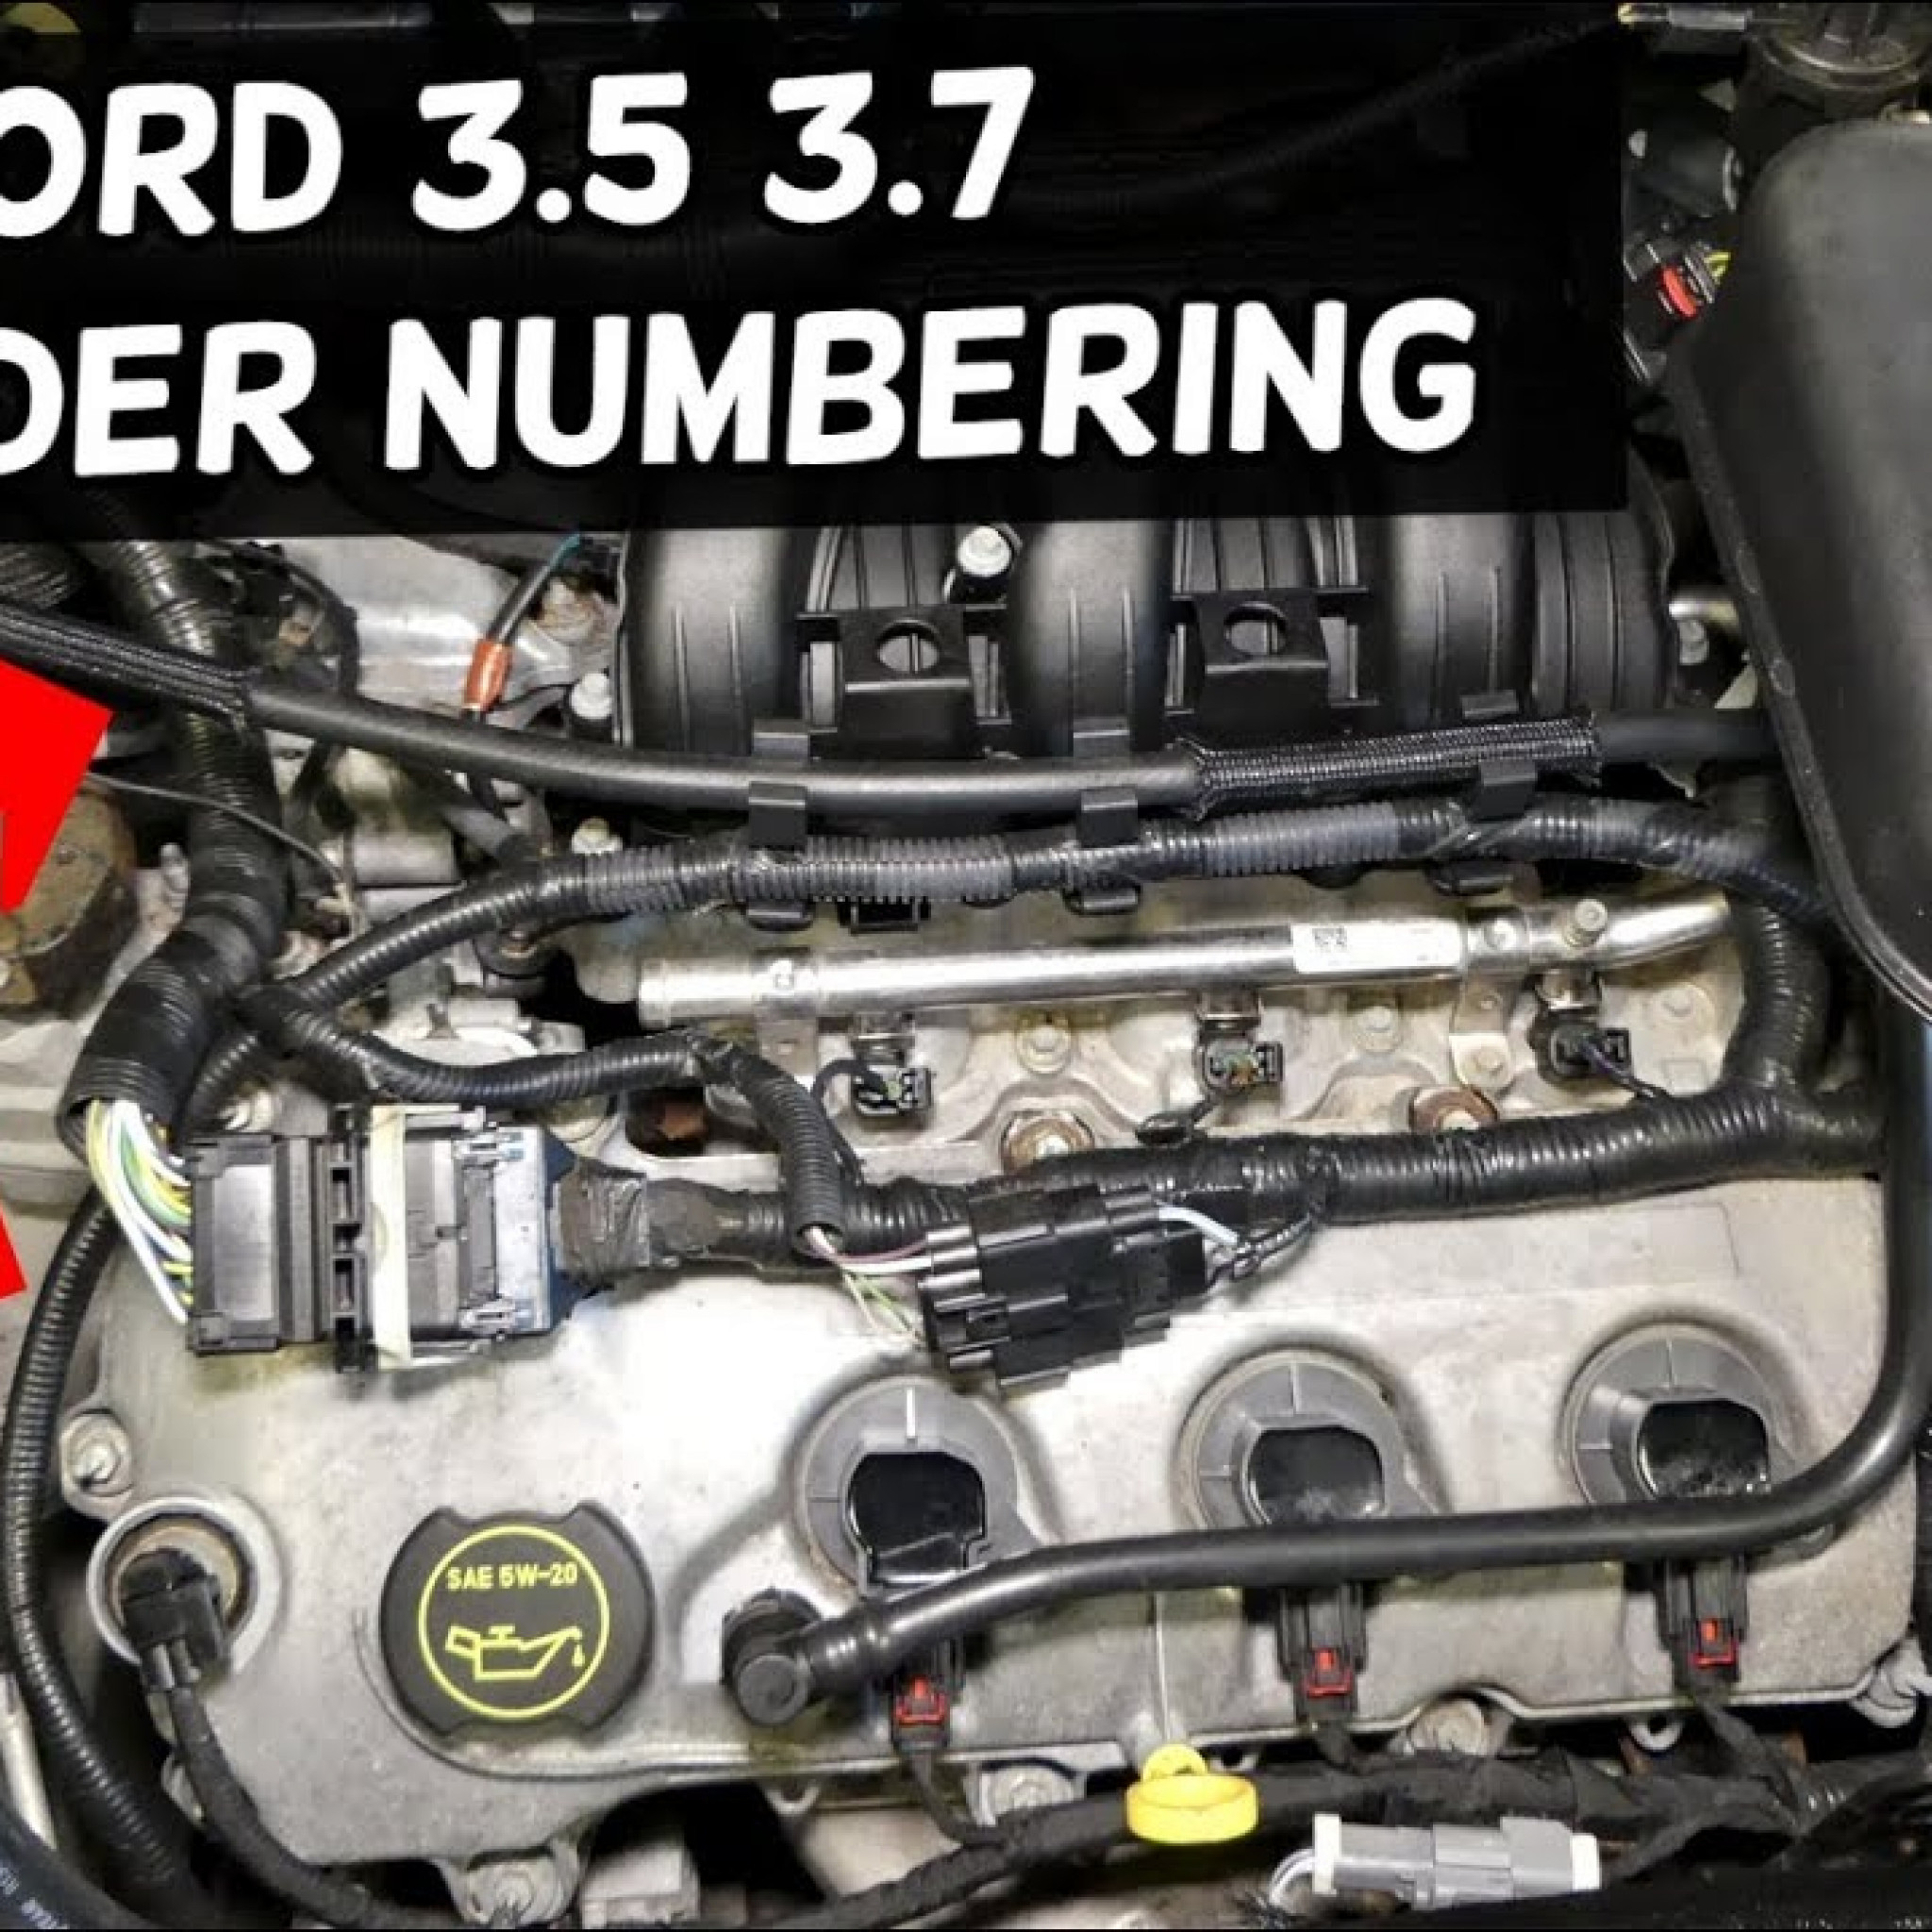 2016 Ford Expedition 3.5 Firing Order | Wiring and Printable